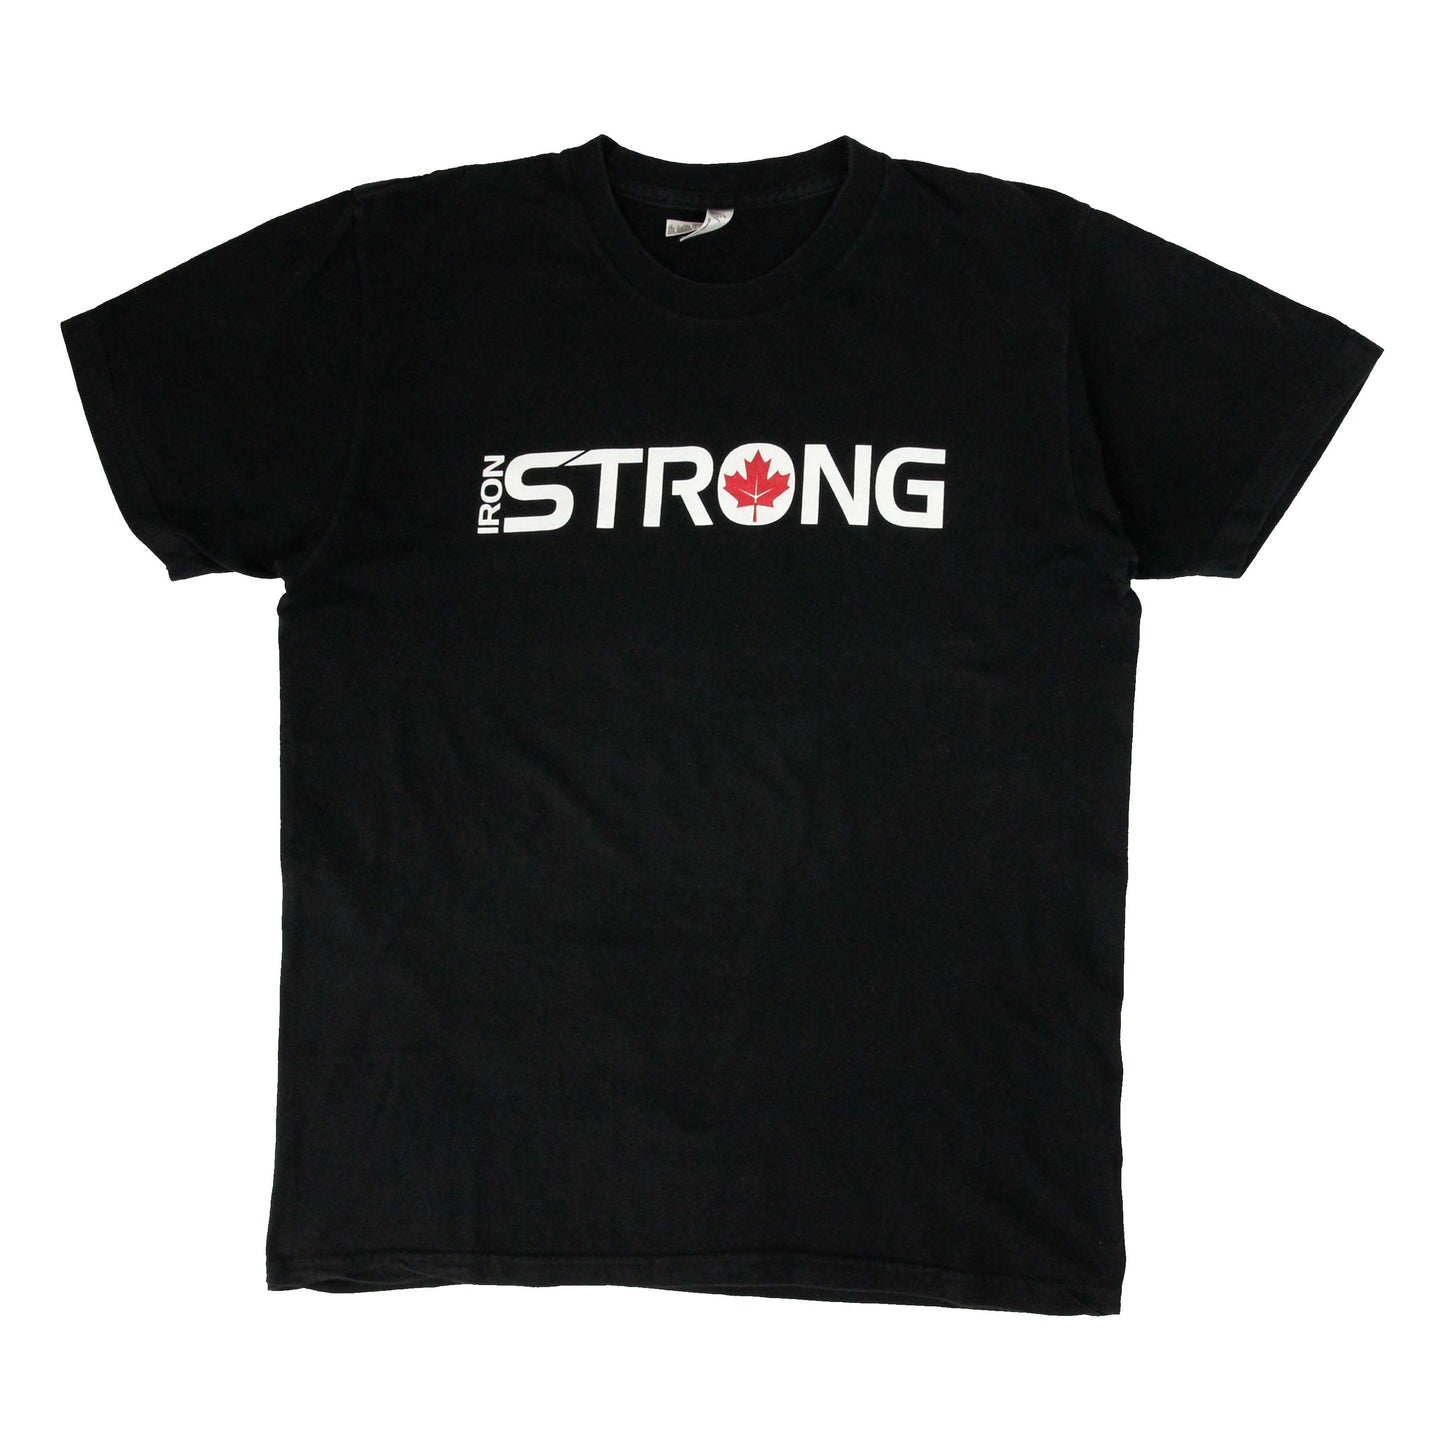 The 'Iron Strong Canada' weightlifting t-shirt | Iron Strong Apparel